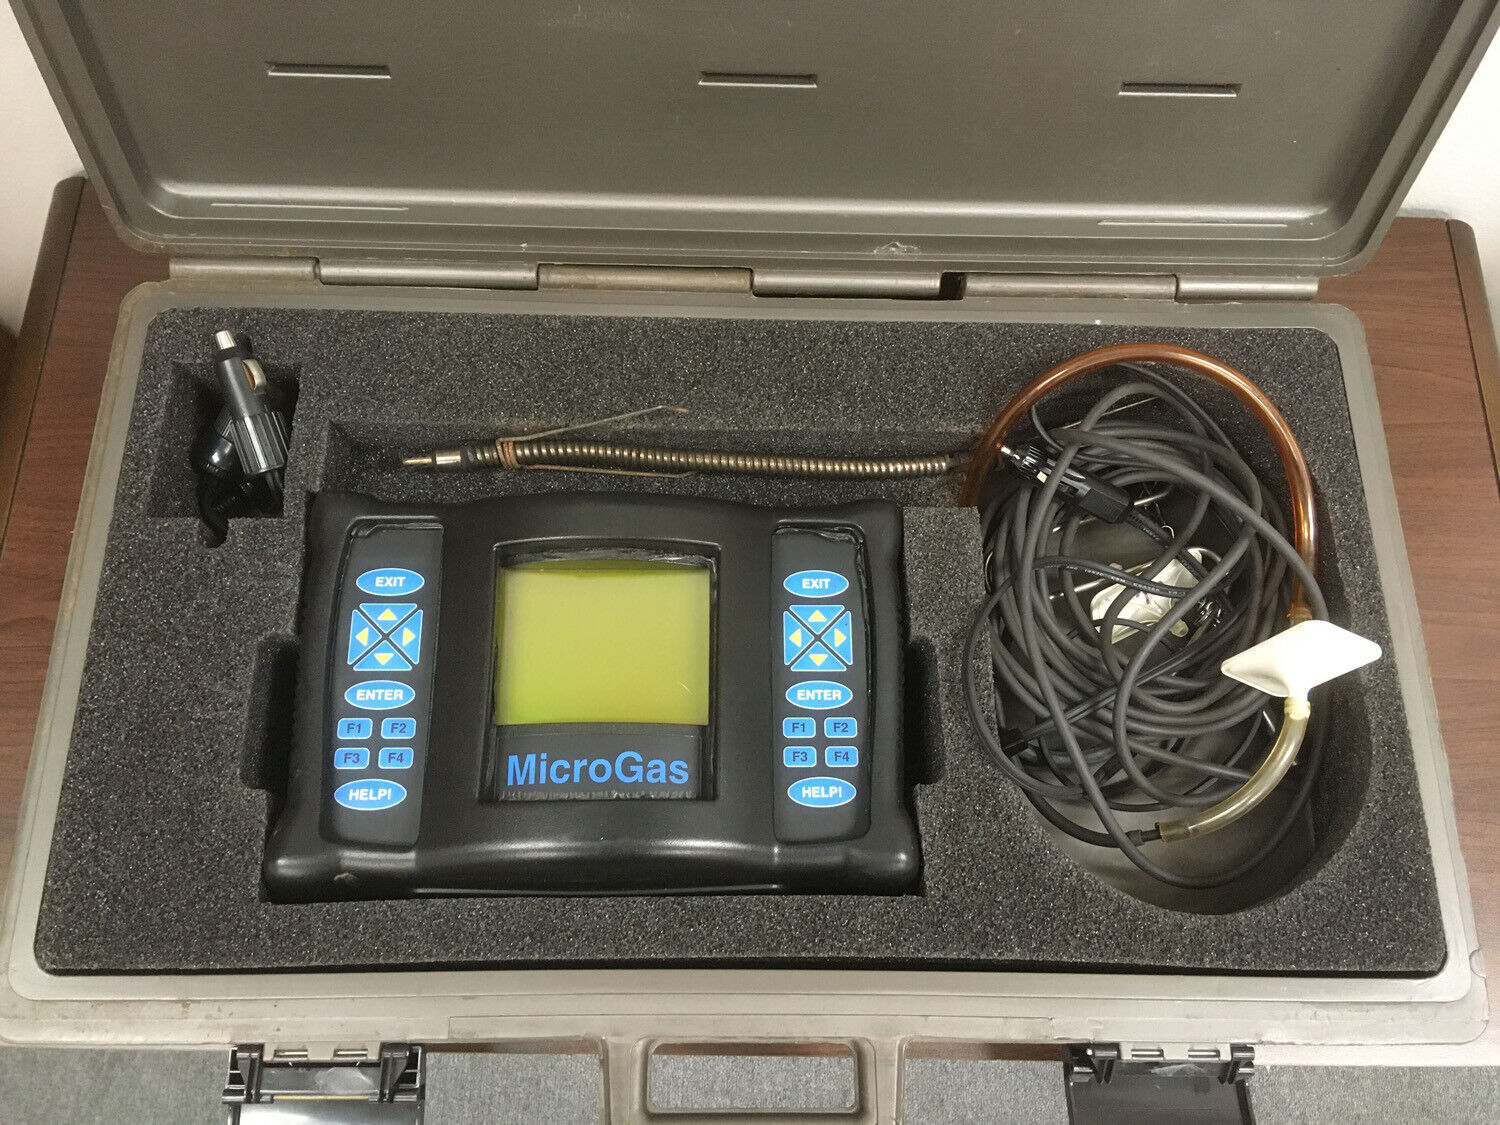 Spx Kent-moore J-39982-micro, Portable 5-gas Emissions Analyzer -graphing Option